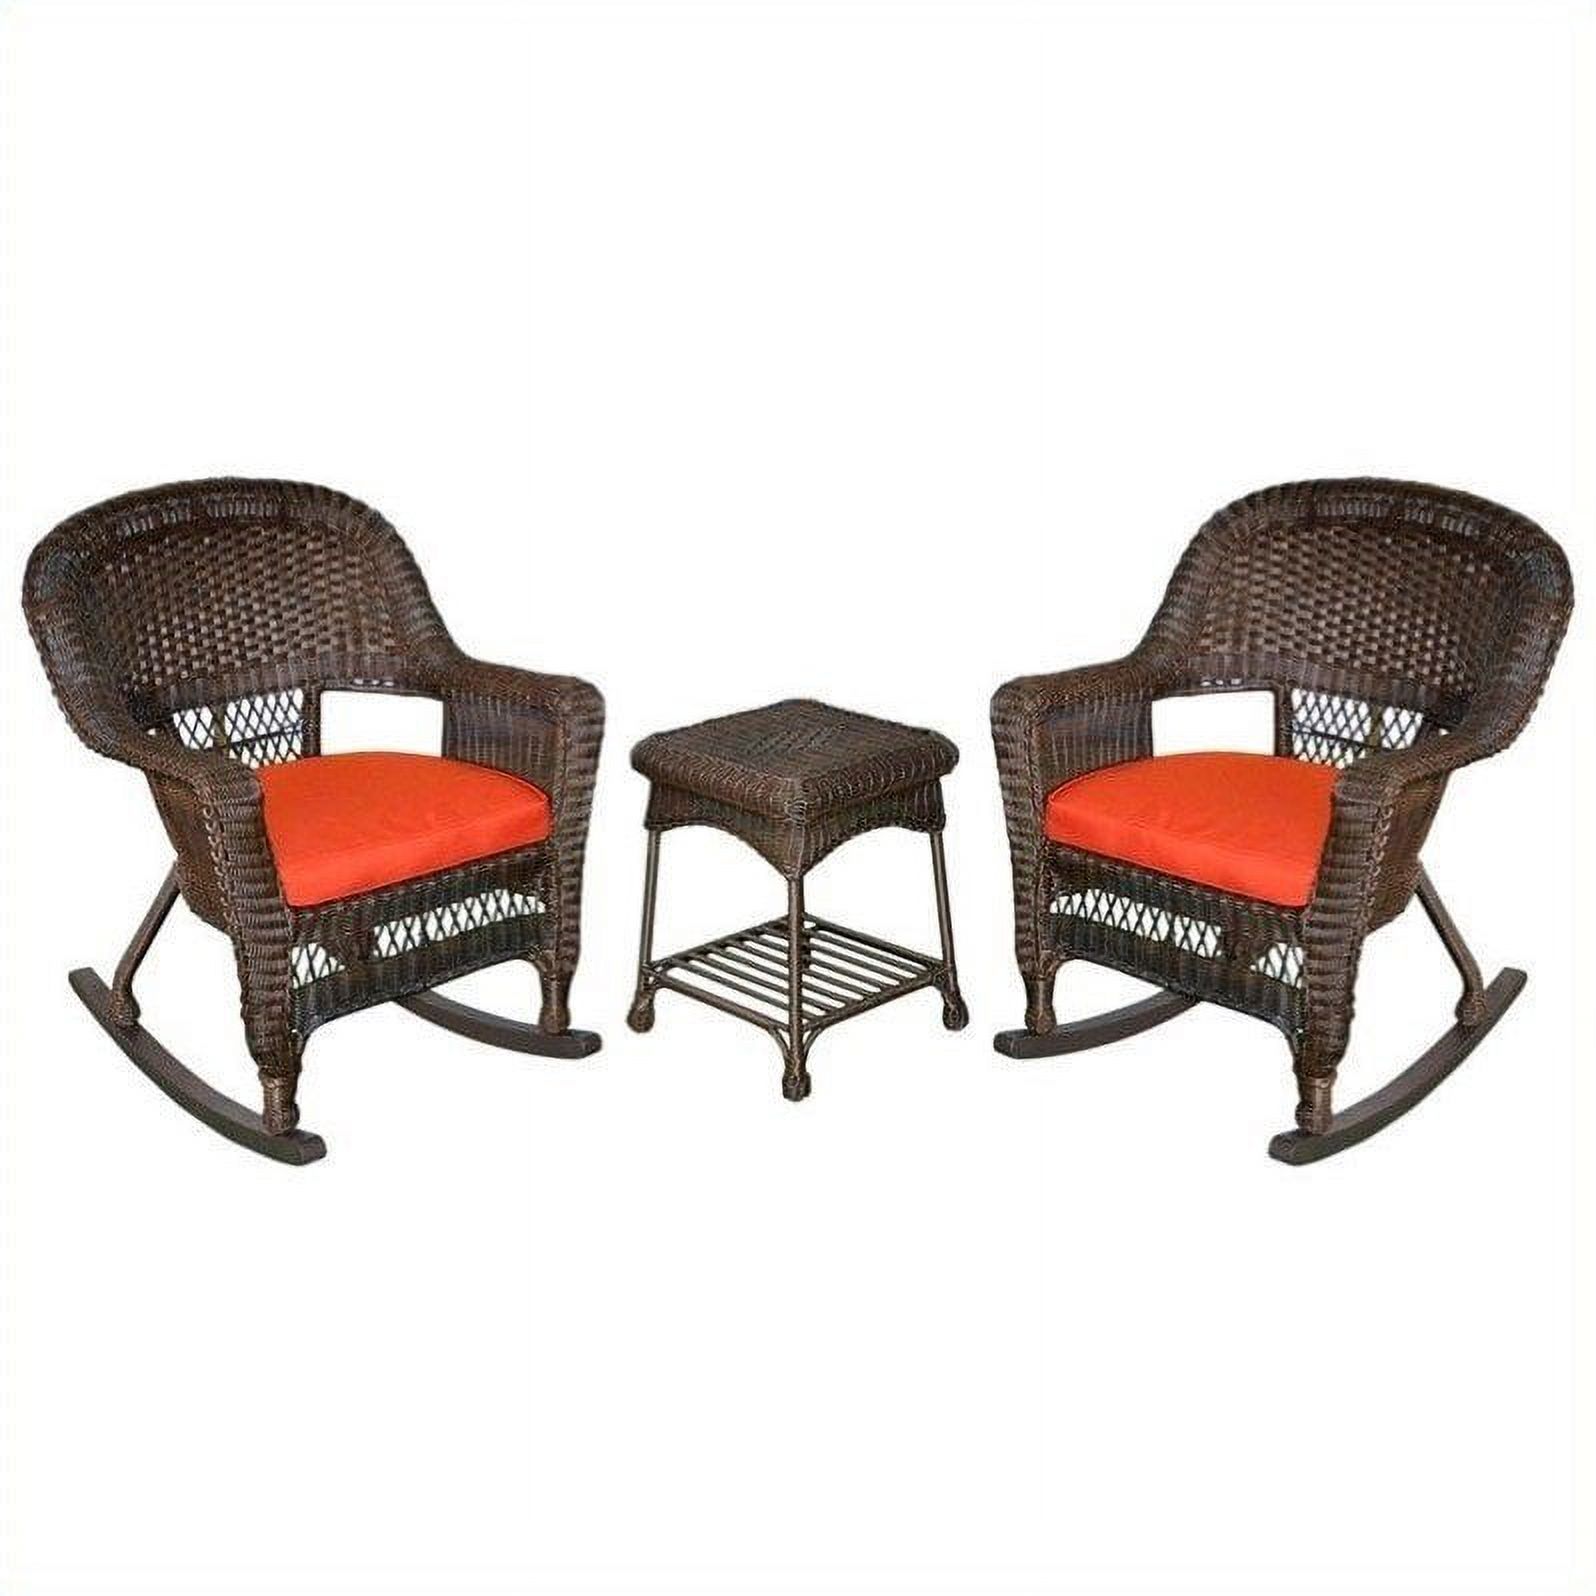 Jeco 3pc Wicker Rocker Chair Set in Espresso with Red Cushion - image 1 of 1